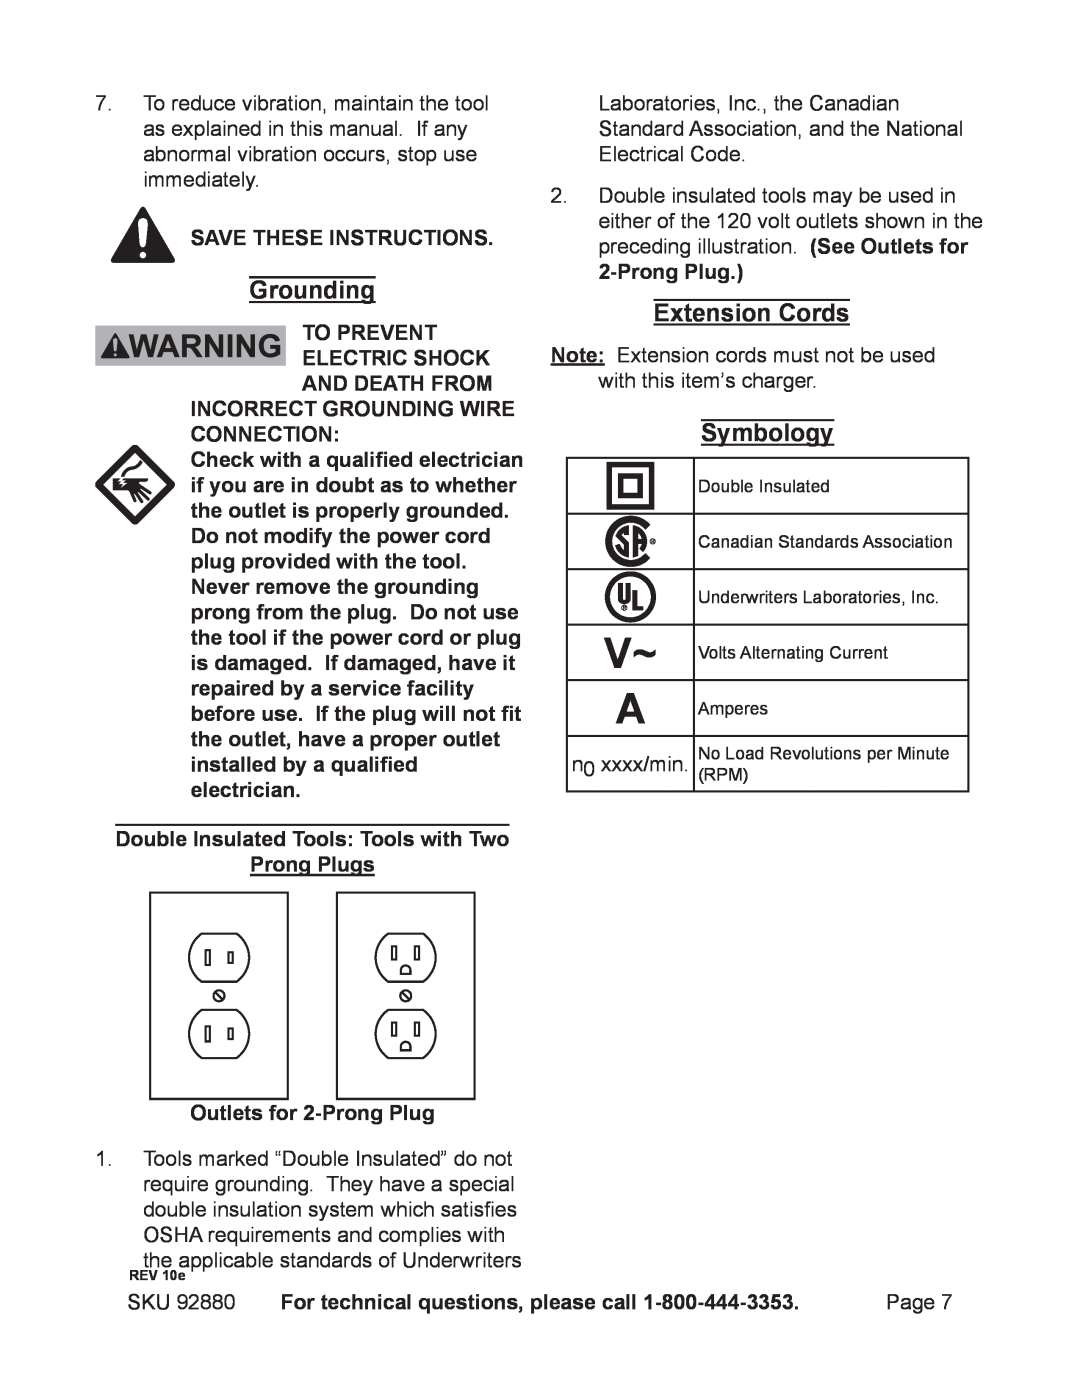 Chicago Electric 92880 operating instructions Grounding, Extension Cords, Symbology 